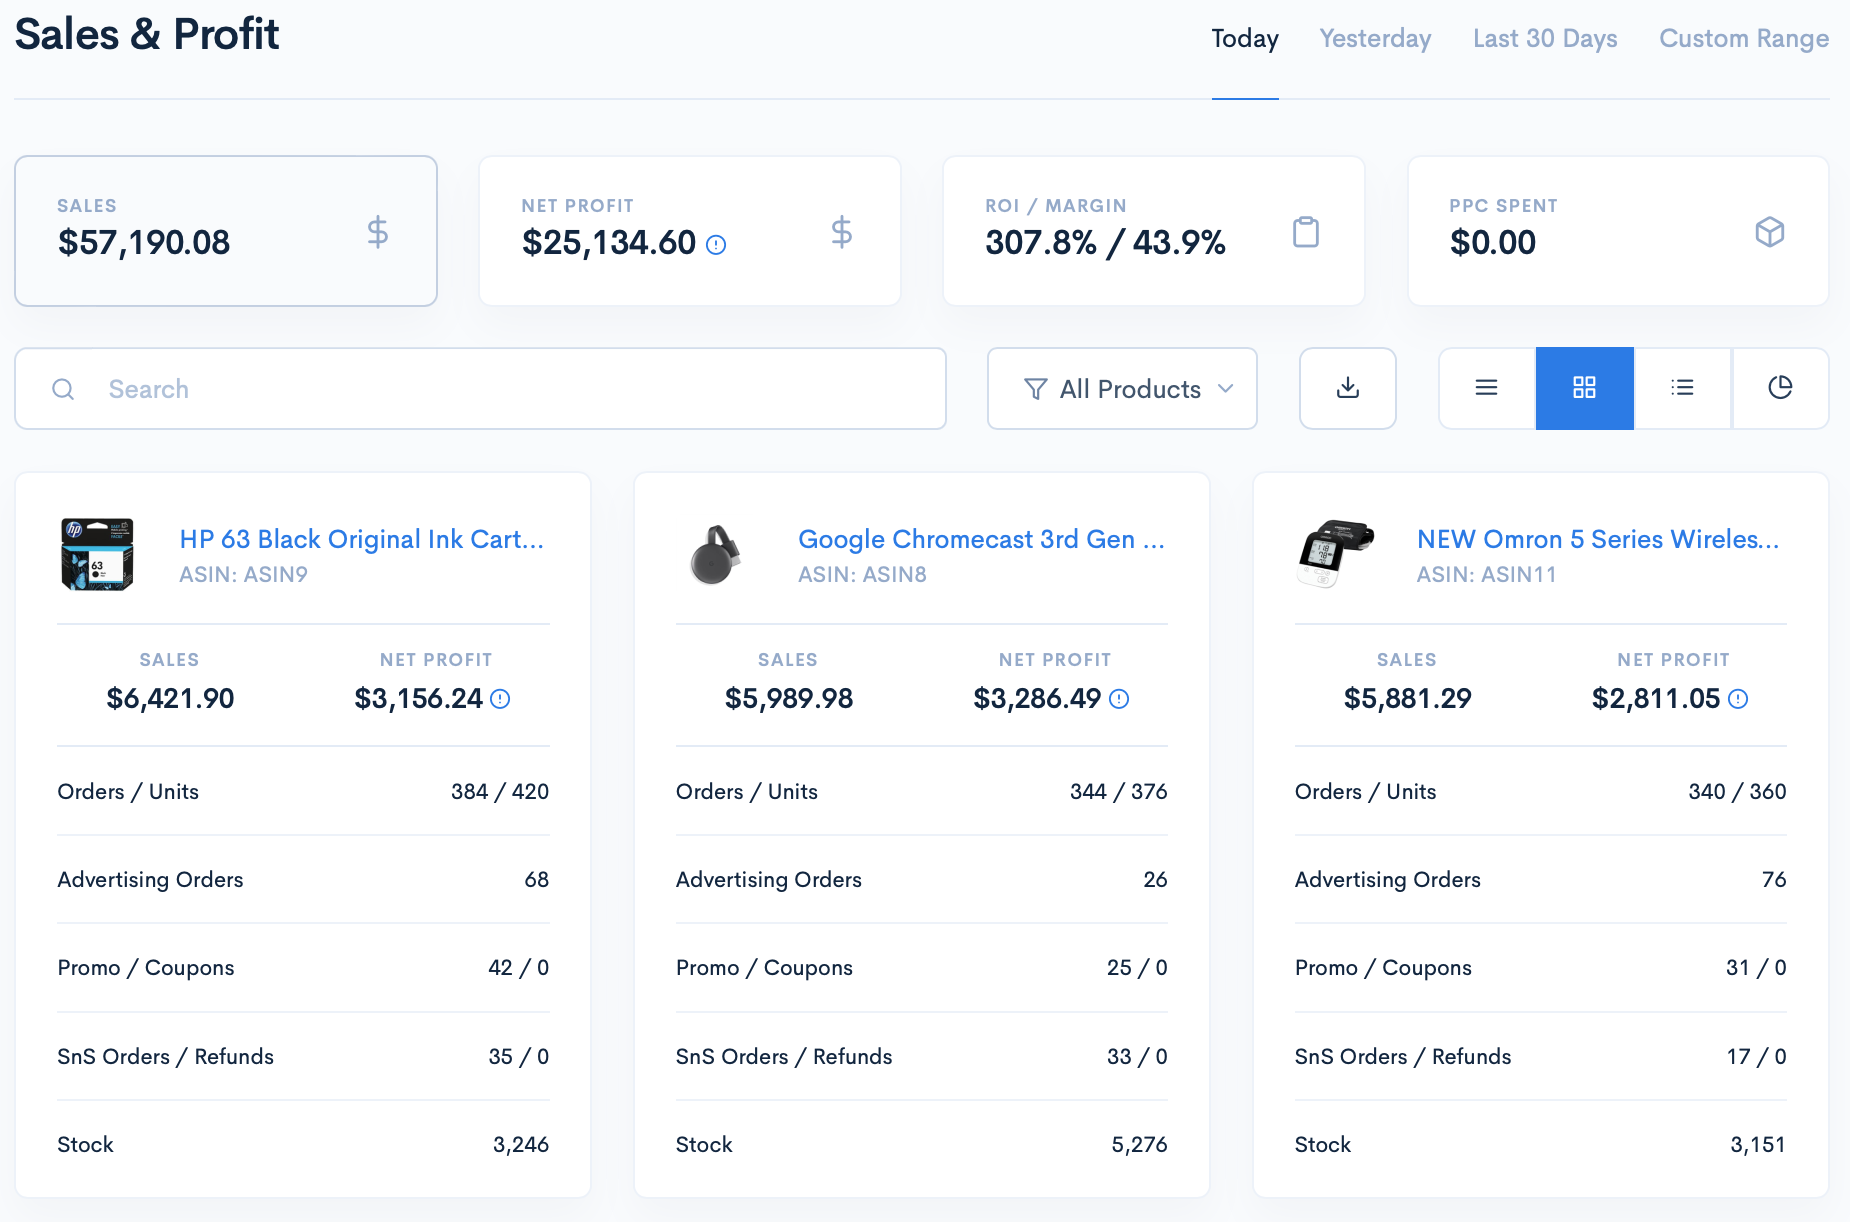 SelleRise helps you measure your business analytics